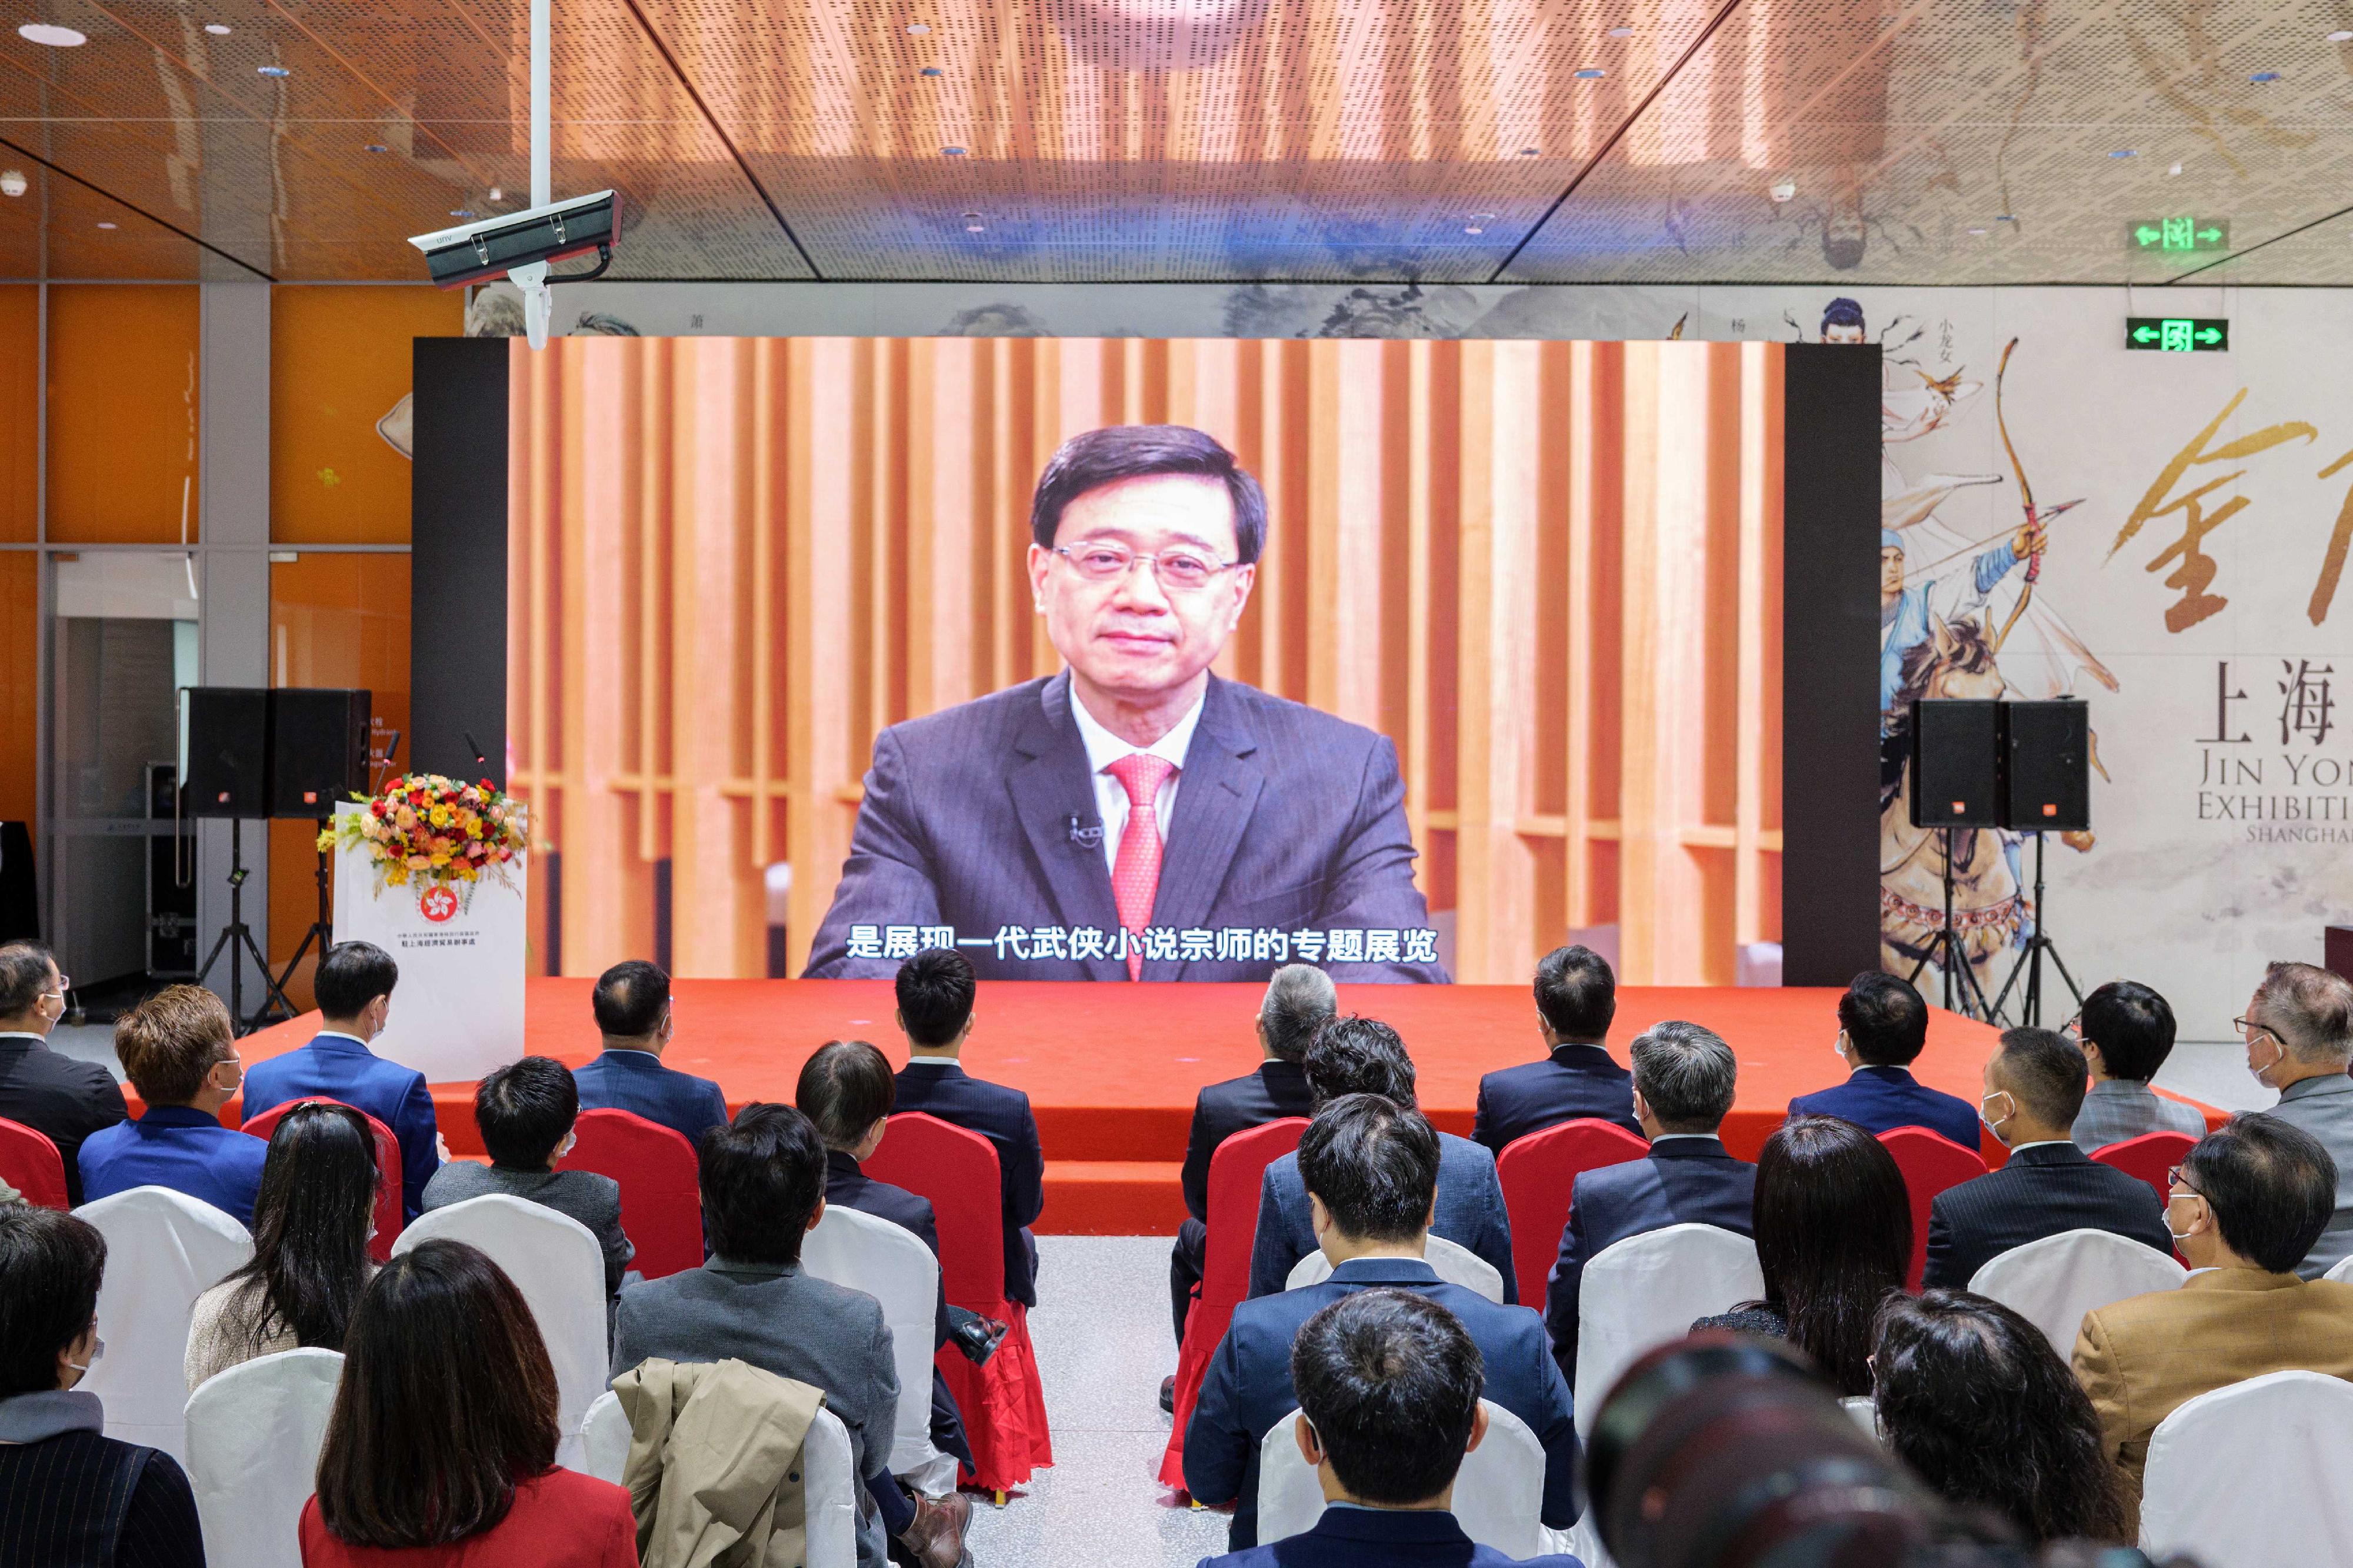 "Jin Yong Exhibition", organised by the Hong Kong Economic and Trade Office in Shanghai, was unveiled today (October 28) at Shanghai Library East in Shanghai. Photo shows the Chief Executive, Mr John Lee, delivering a pre-recorded speech at the opening ceremony. 